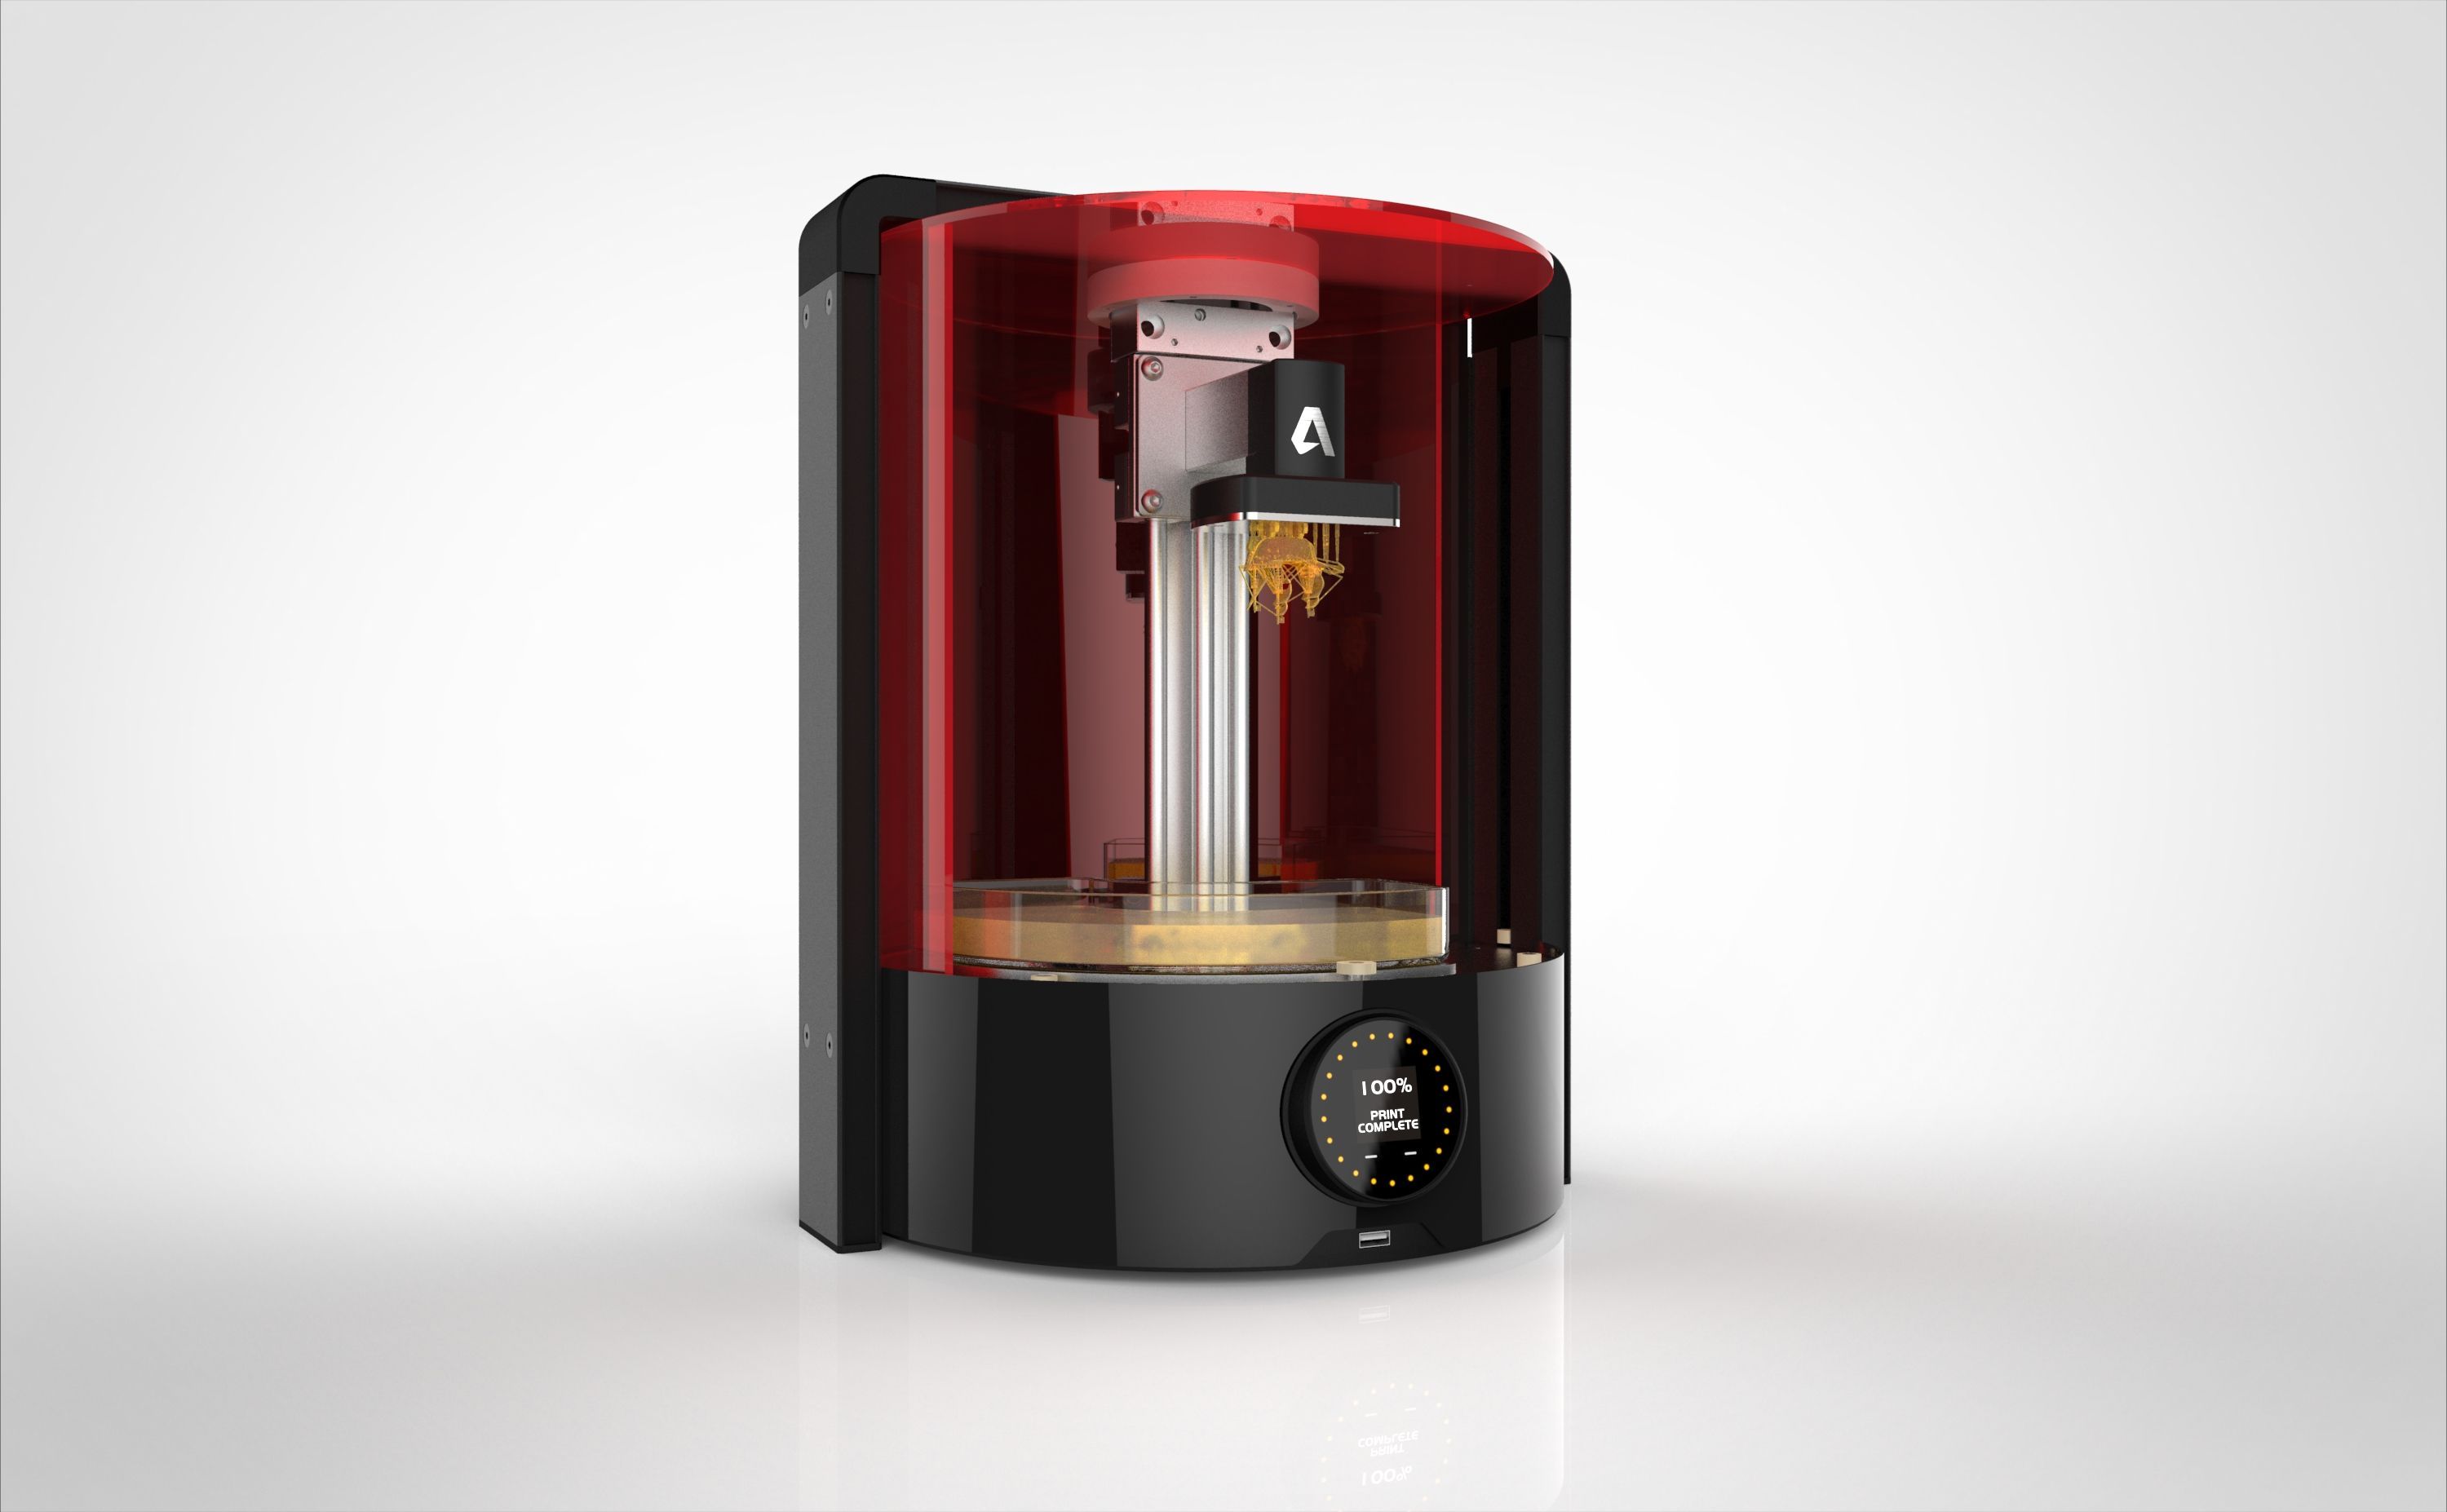 autodesk tackles 3d printing industry with open software platform and printer image 1